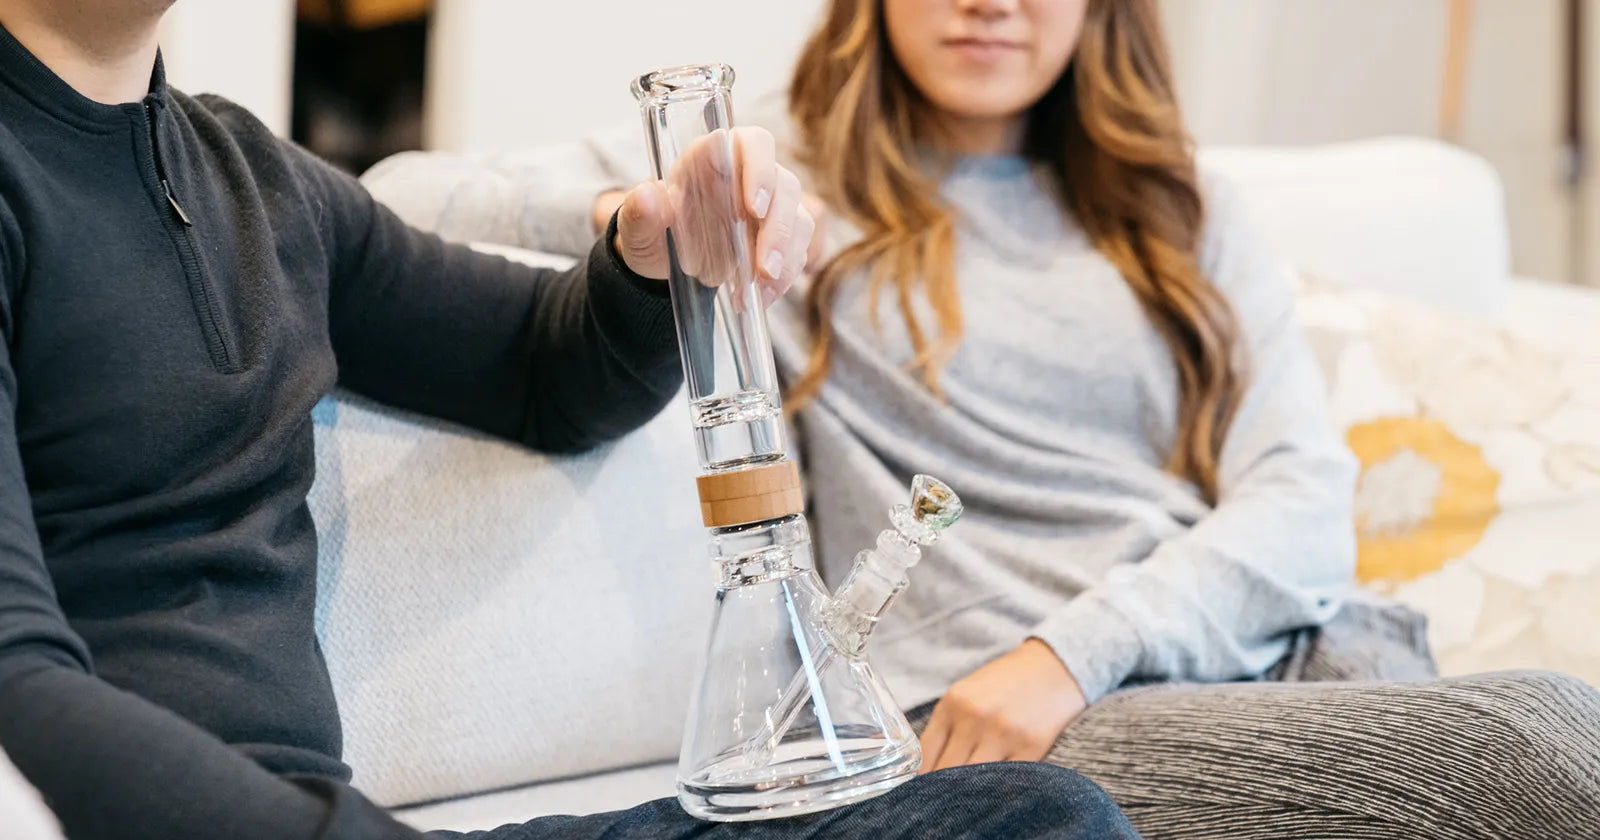 Demystifying the build a bong concept